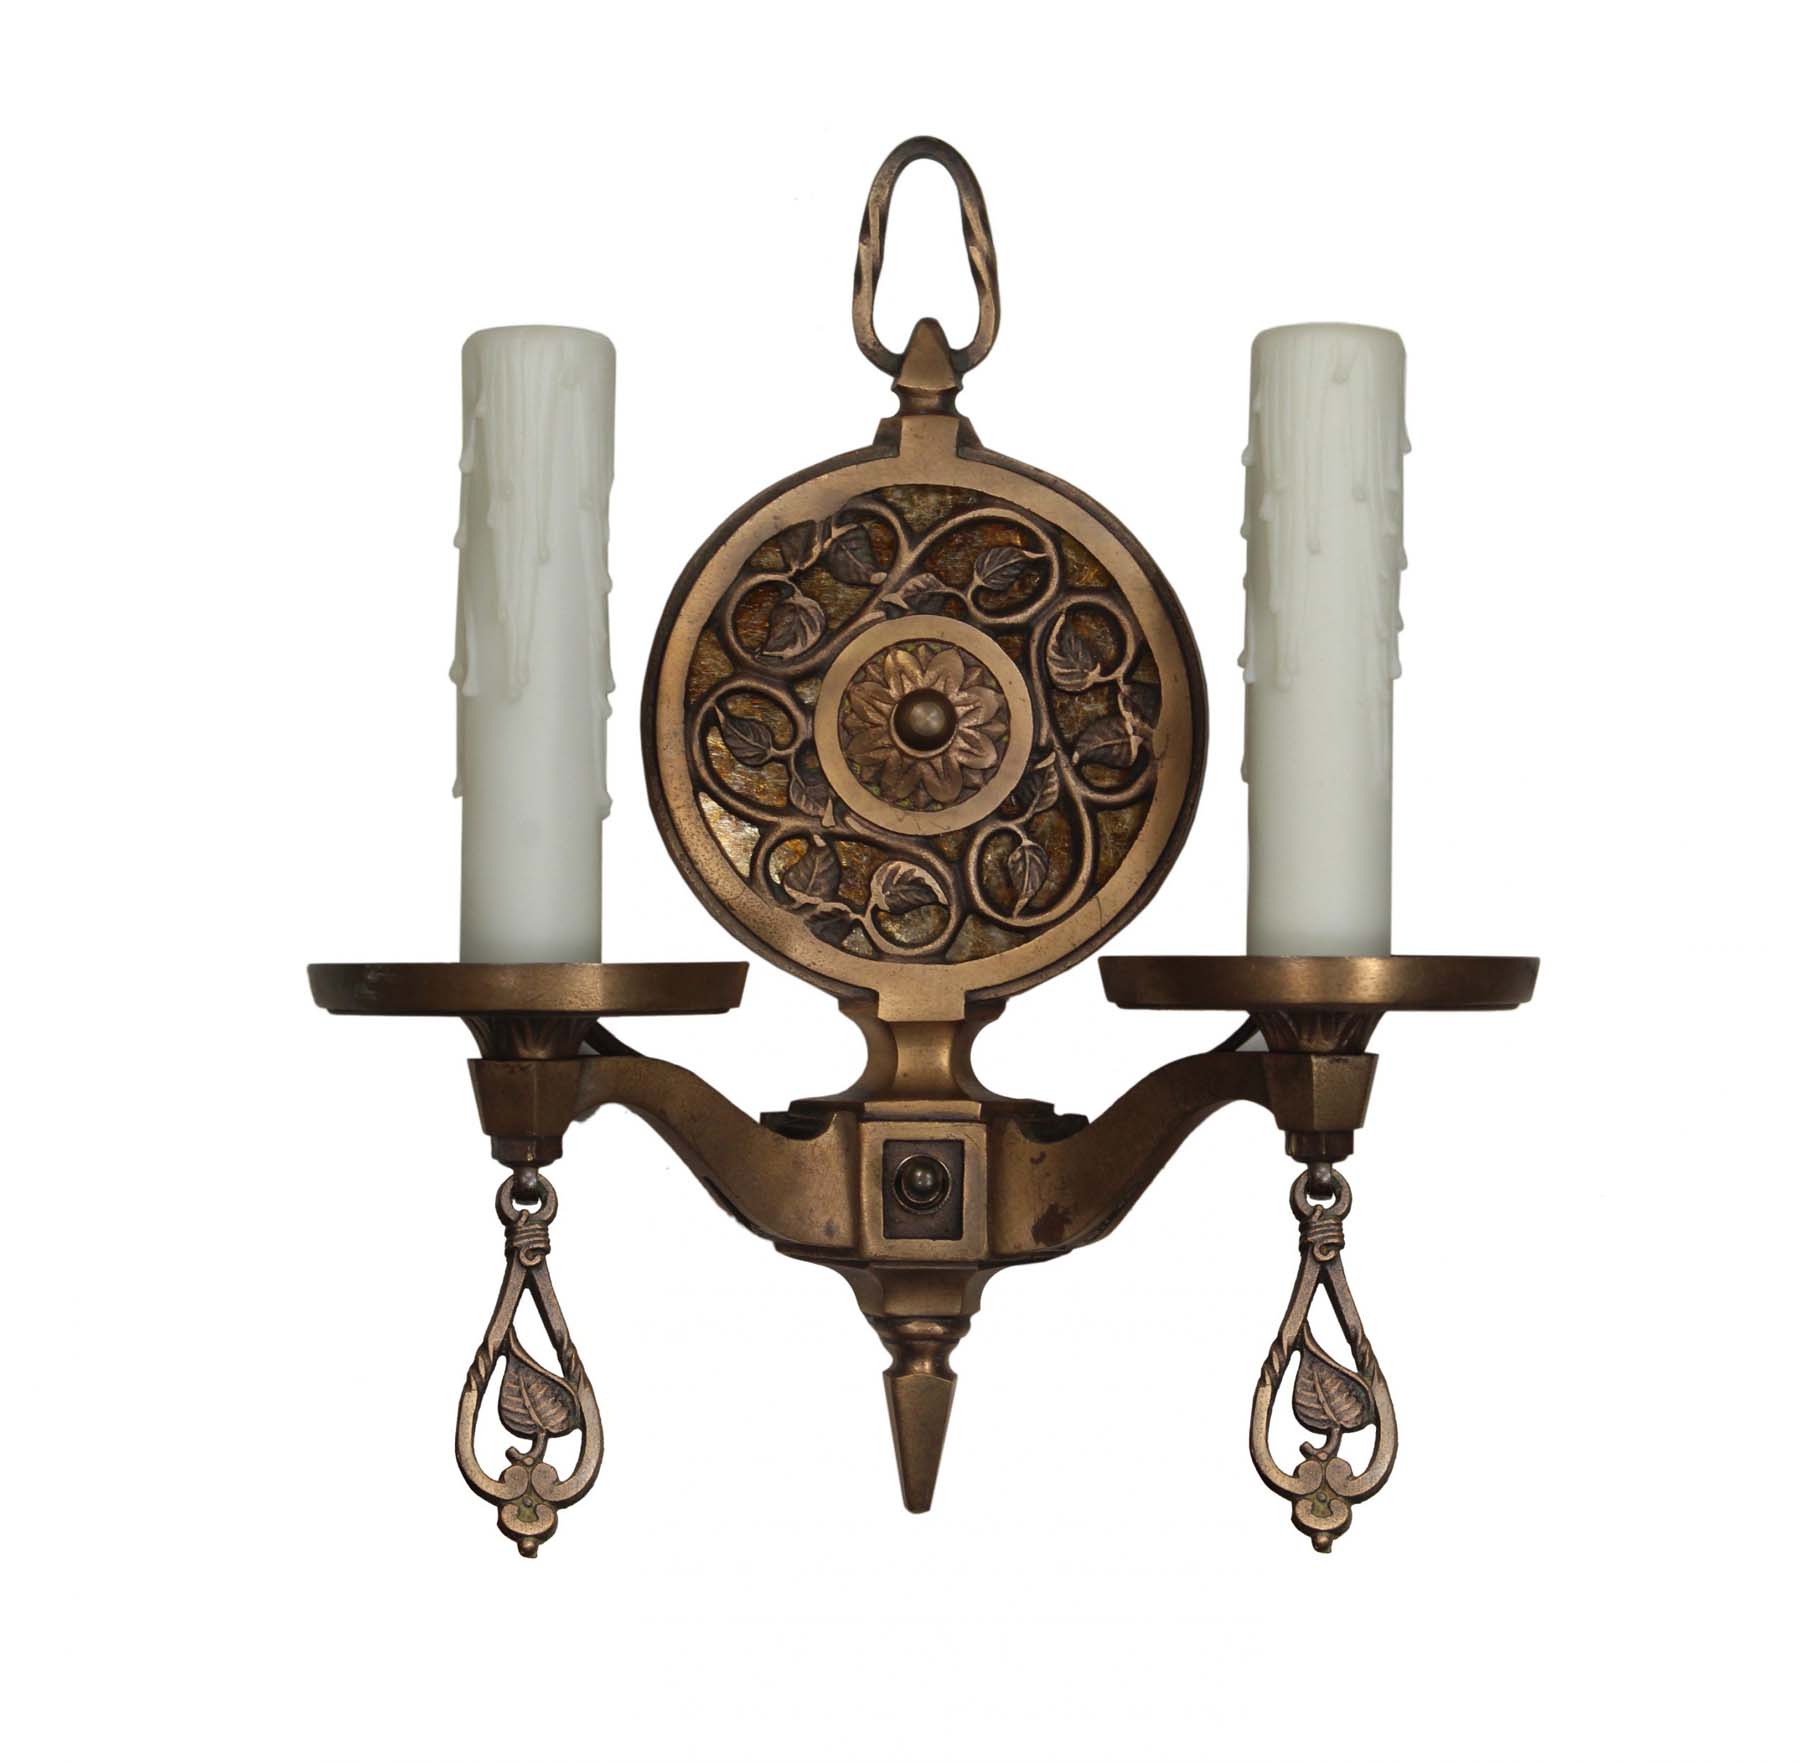 SOLD Matching Antique Cast Bronze Sconces with Mica, c. 1920s -68558